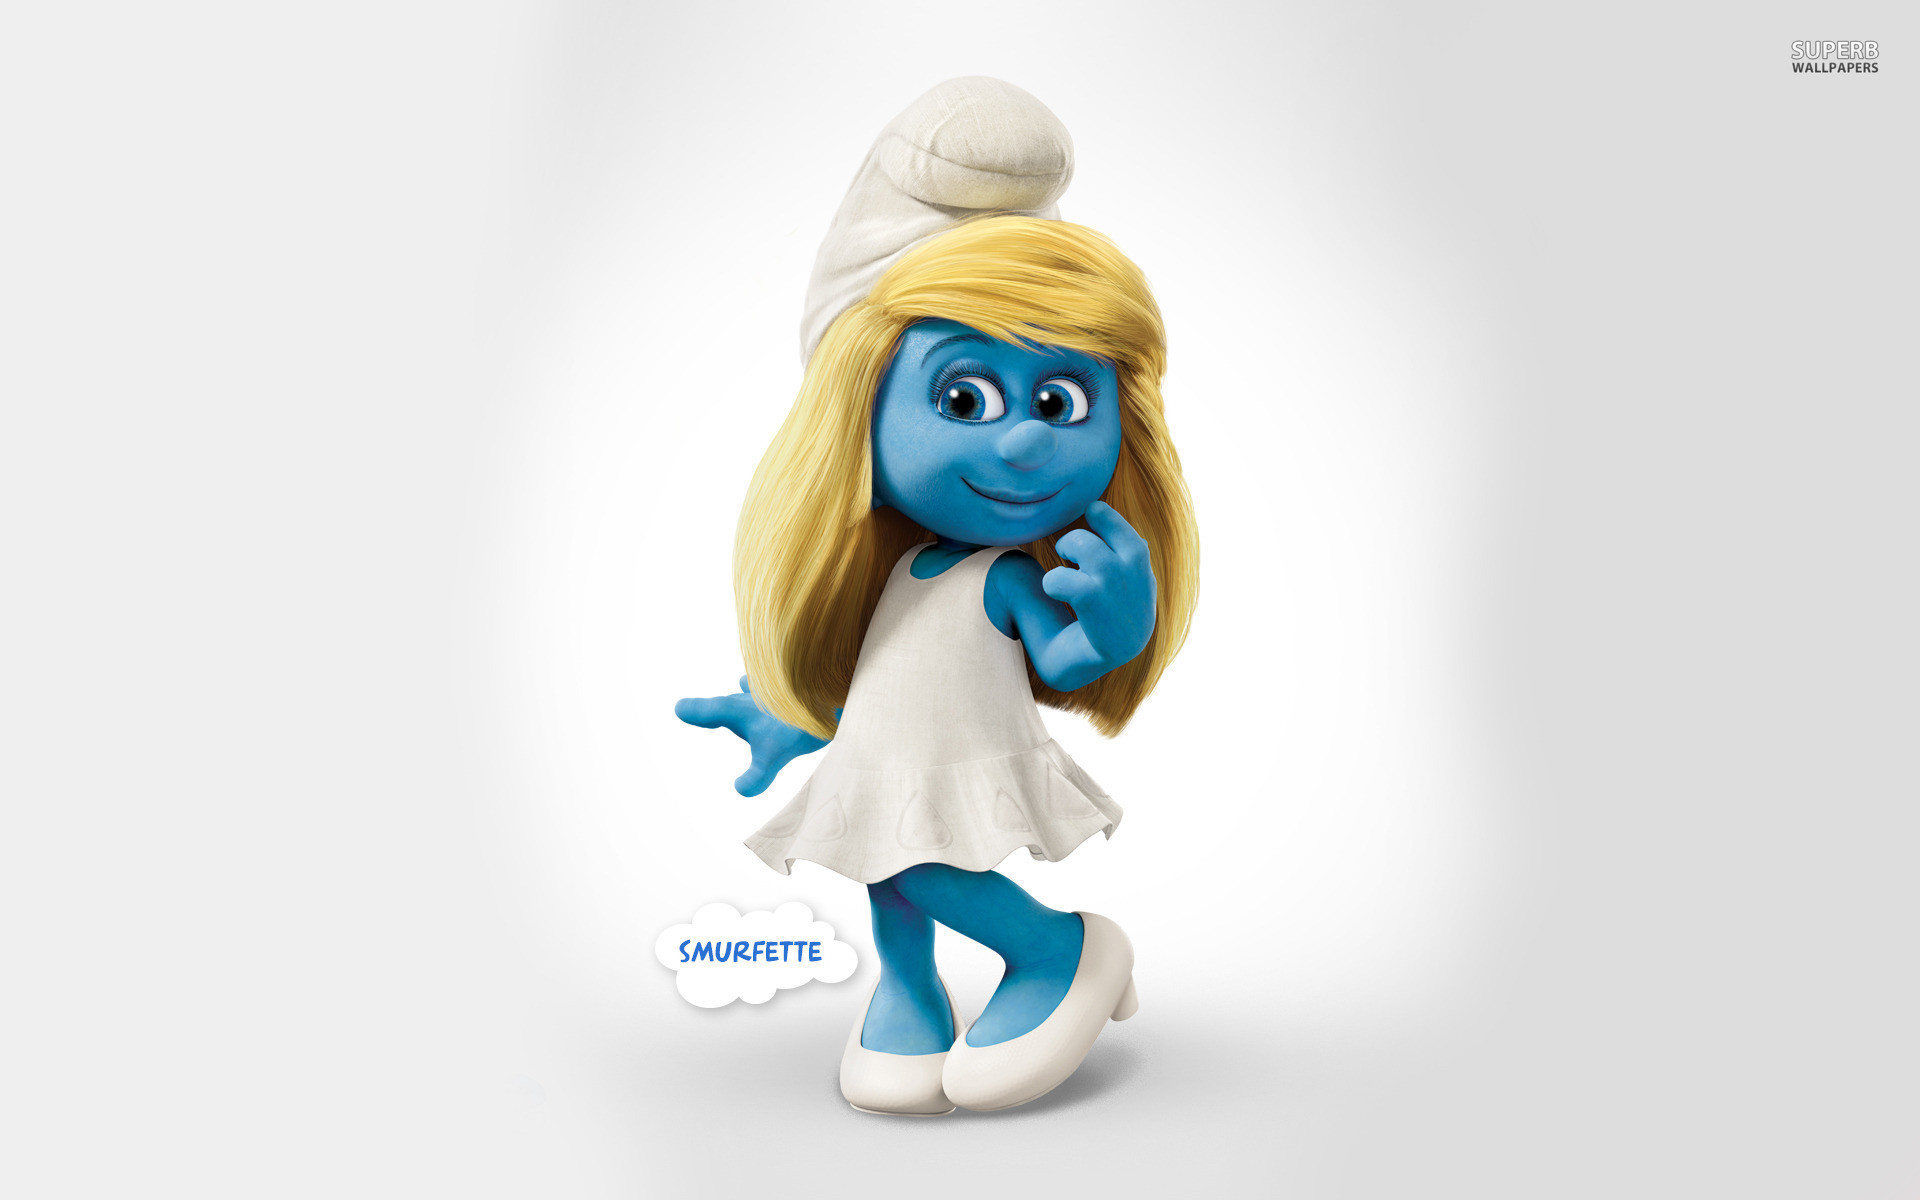 1920x1200 Smurfs Wallpaper Desktop Background Clumsy the Smurfs Cartoon Full HD  Background Image for PC .